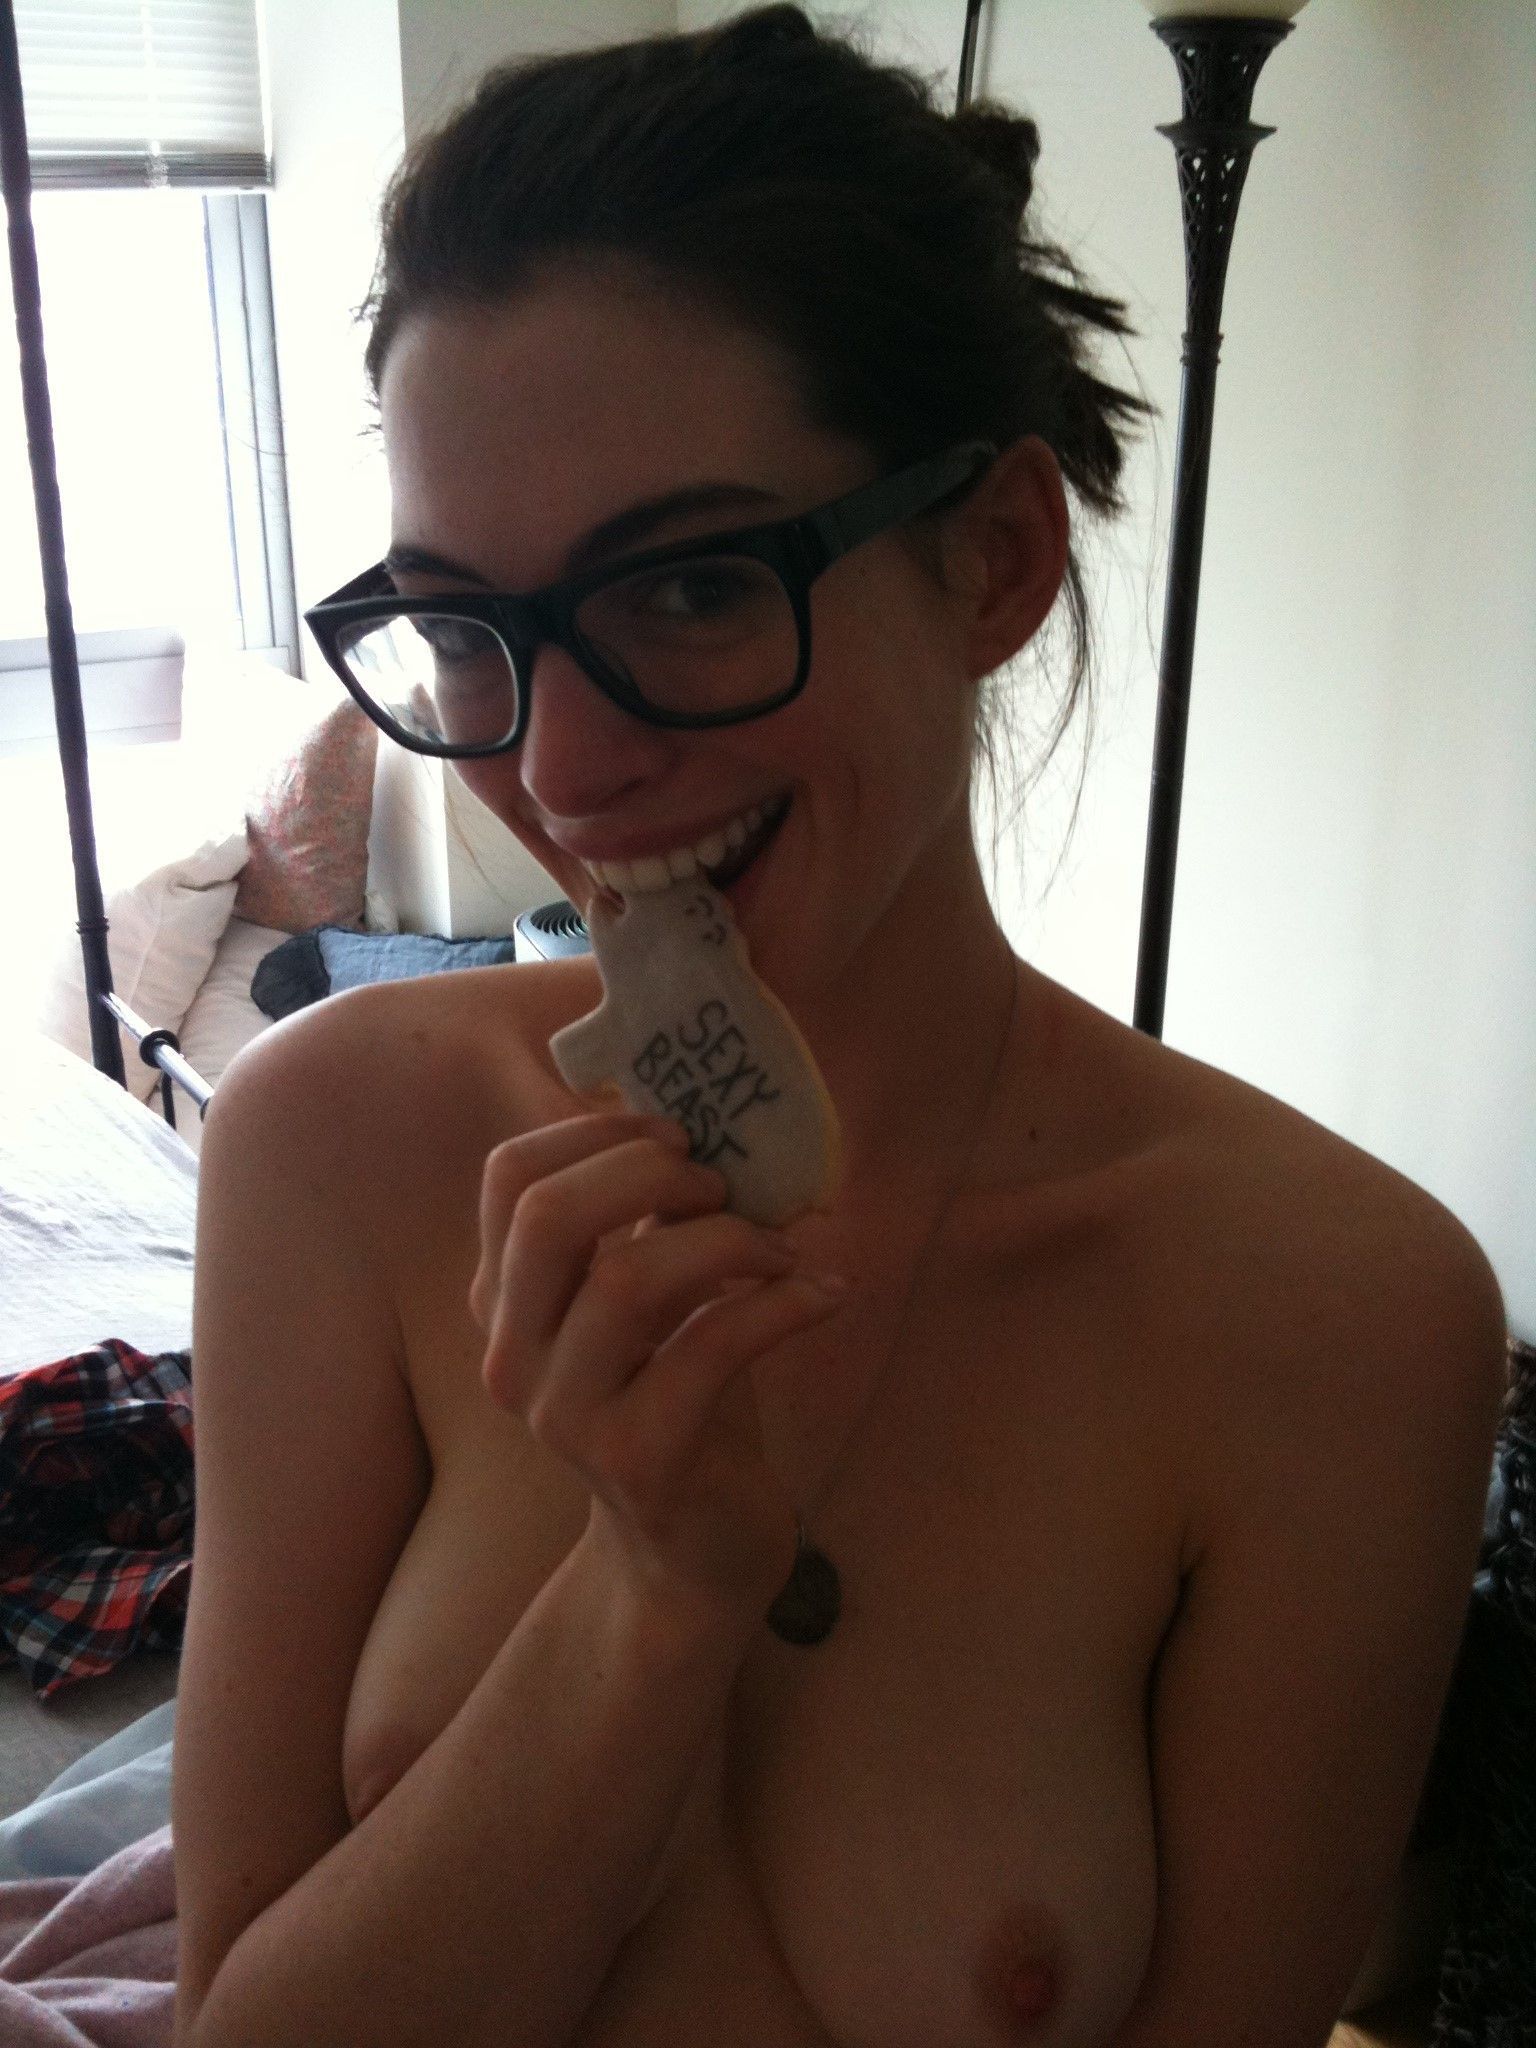 Video of anne hathaway naked